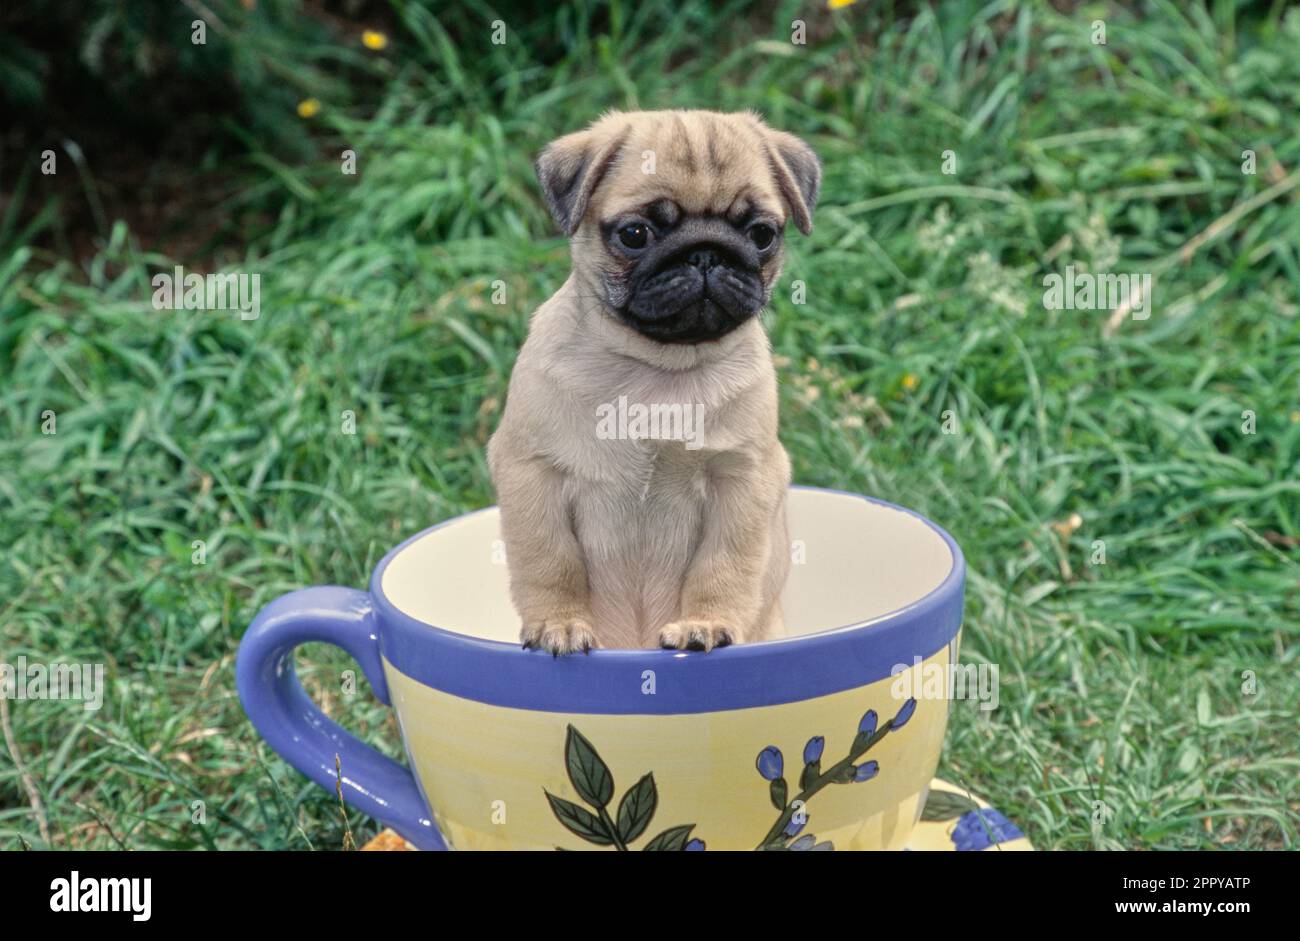 Cute pug puppy sitting with paws up in teacup pot outside in grass Stock Photo